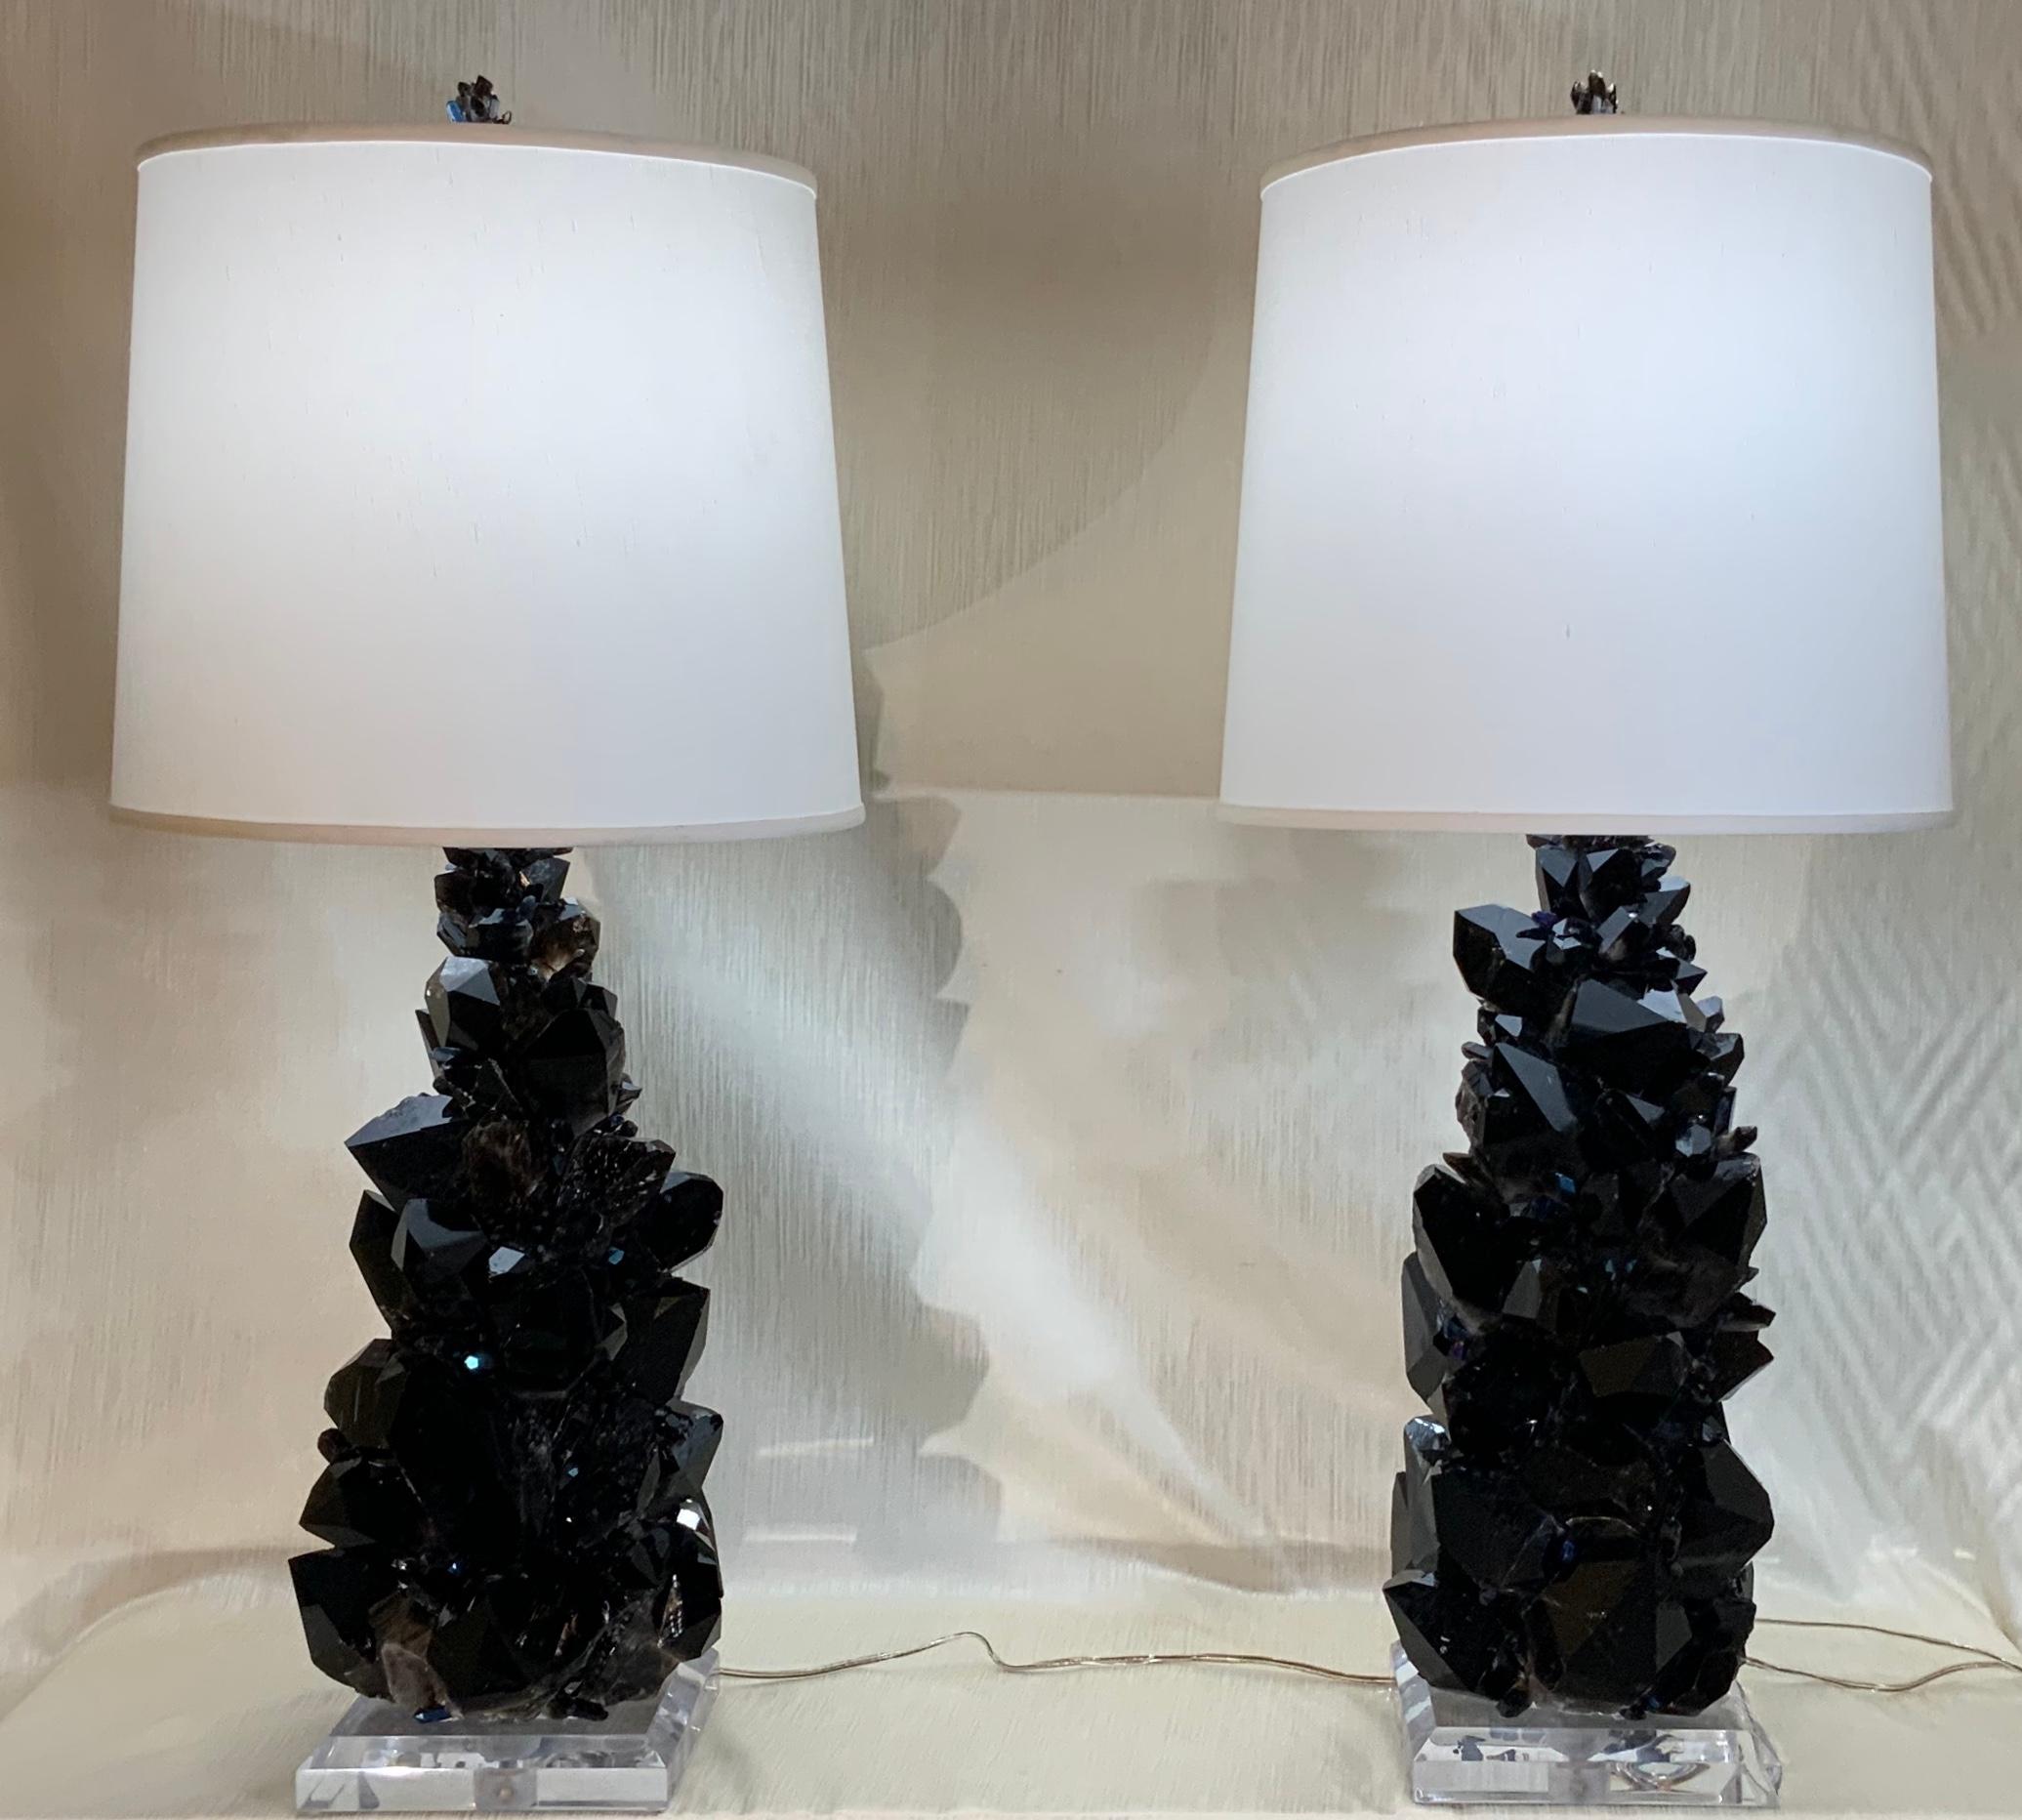 Pair of Large Black Rock Quartz Crystal Table Lamps by, Joseph Malekan In Good Condition For Sale In Delray Beach, FL